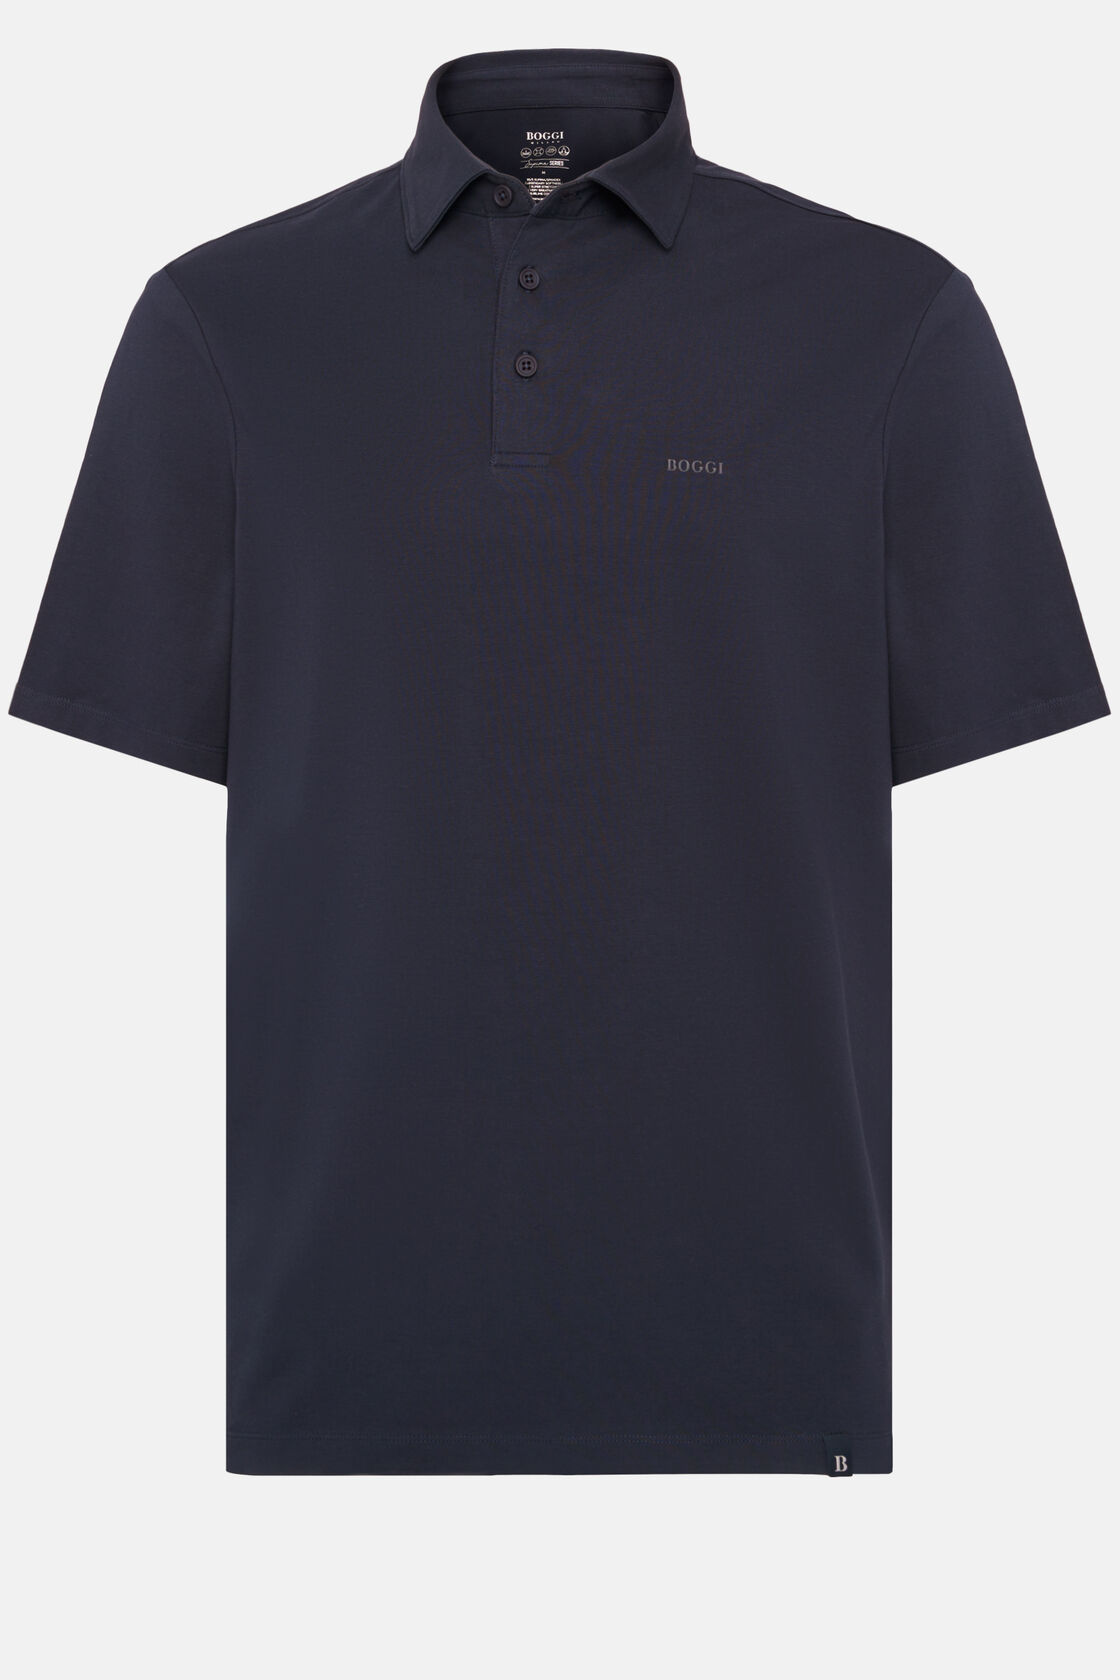 Polo Shirt In Stretch Supima Cotton, Navy blue, hi-res